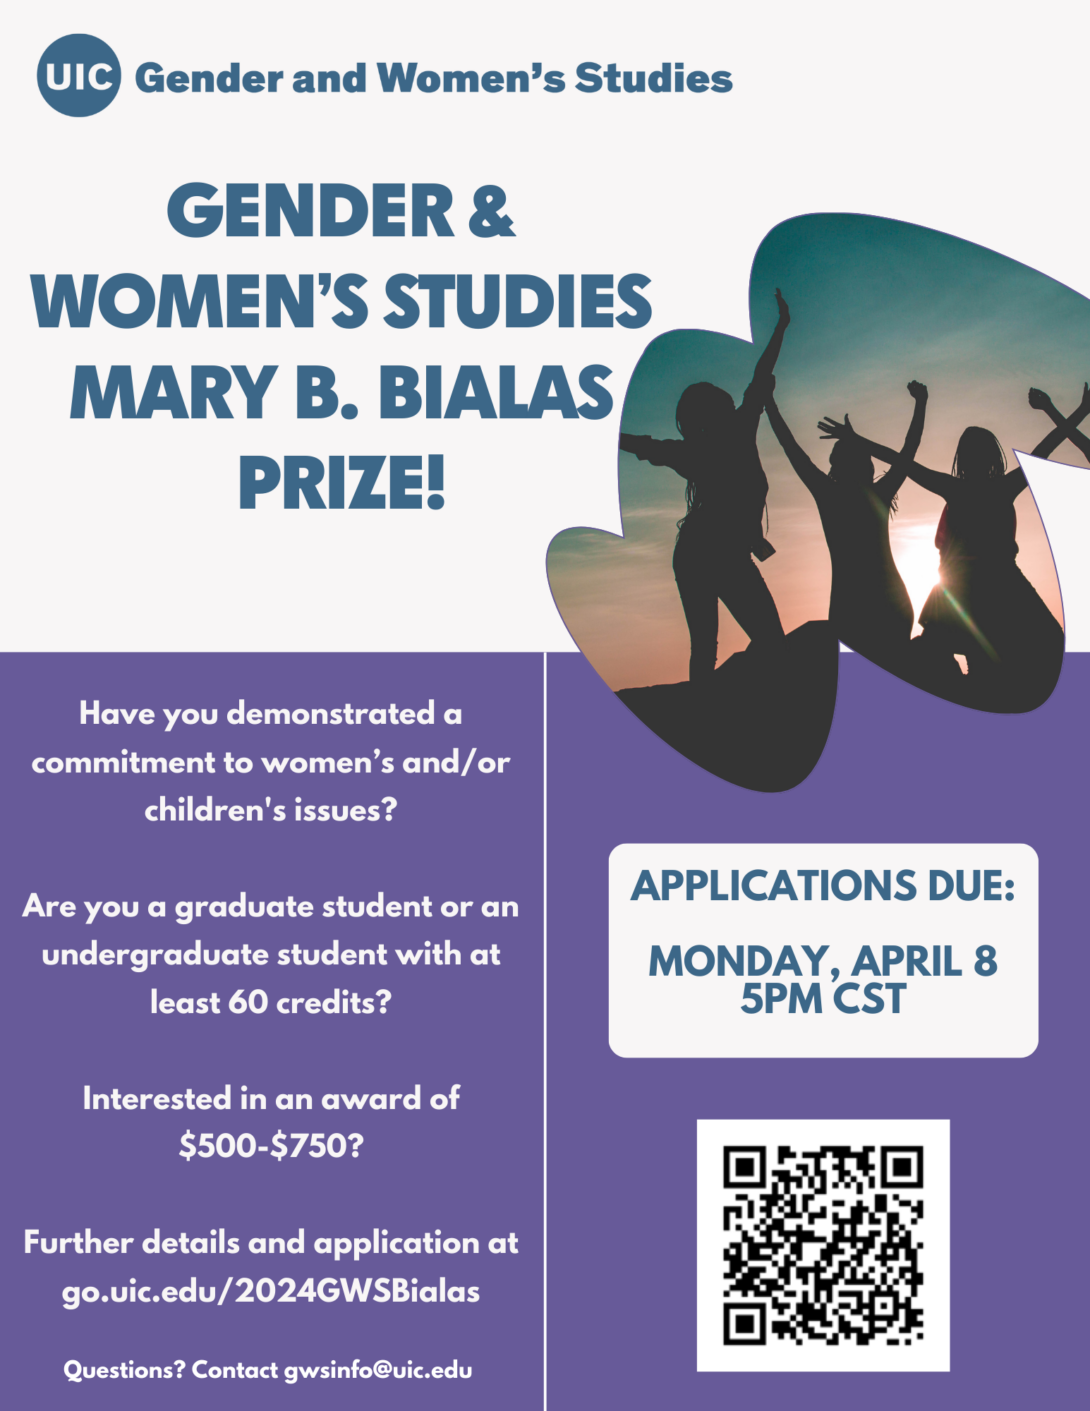 A flyer explaining the Mary B. Bialas Prize, application criteria, deadline, and application instructions, link, and QR code. The bottom half of the flyer has a purple background and white text. The top half of the flyer has a white background and teal text. On the right, top half of the flyer is an image of the silhouettes of three people with their arms outstretched above their heads, the sun behind them, and a bluish and pinkish sky in an asymmetrical cutout design. The GWS logo in teal appears in the top left portion of the flyer.